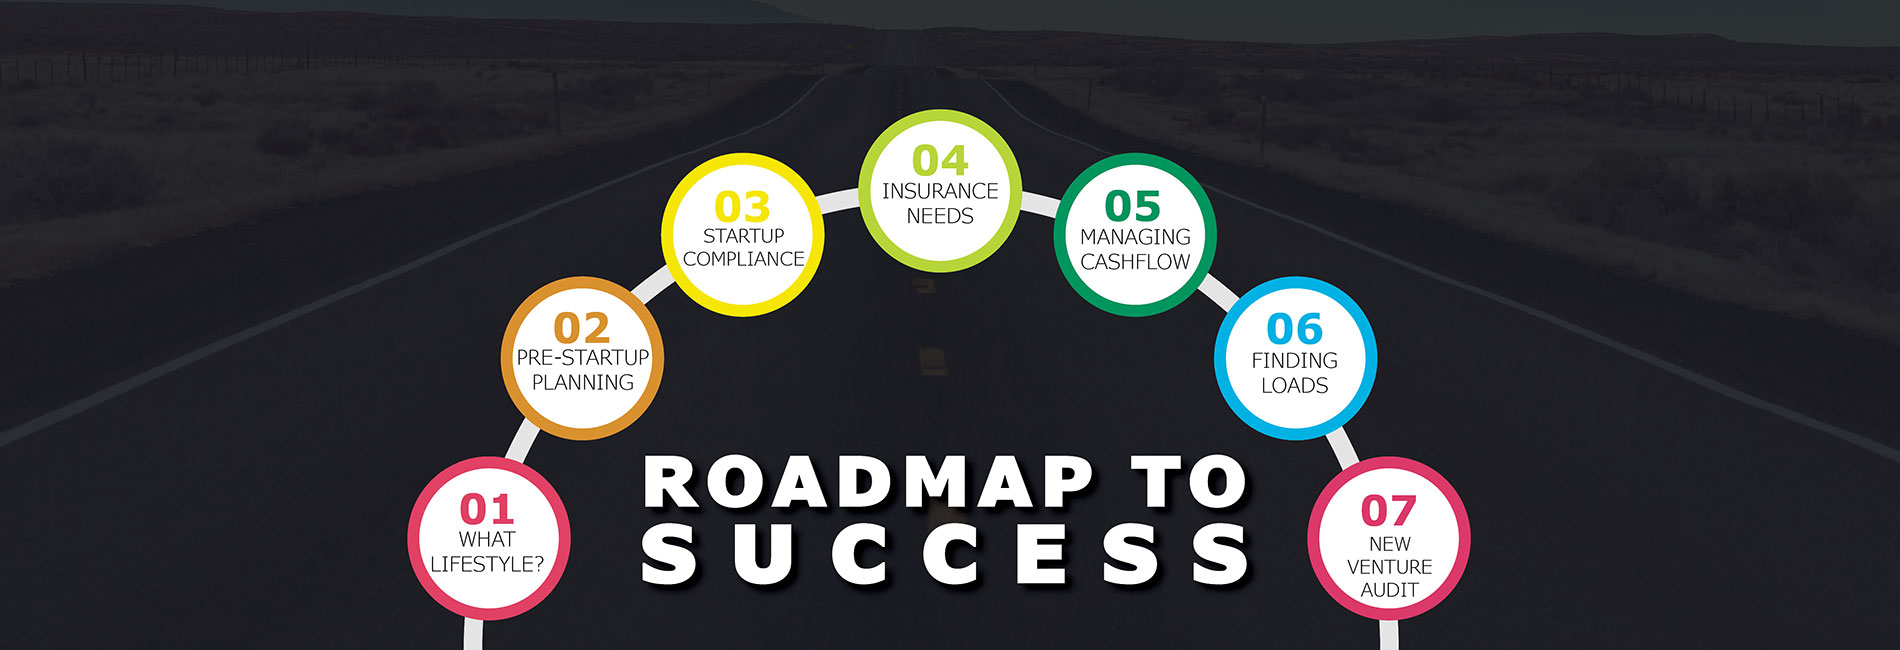 Roadmap For A Successful Trucking Business